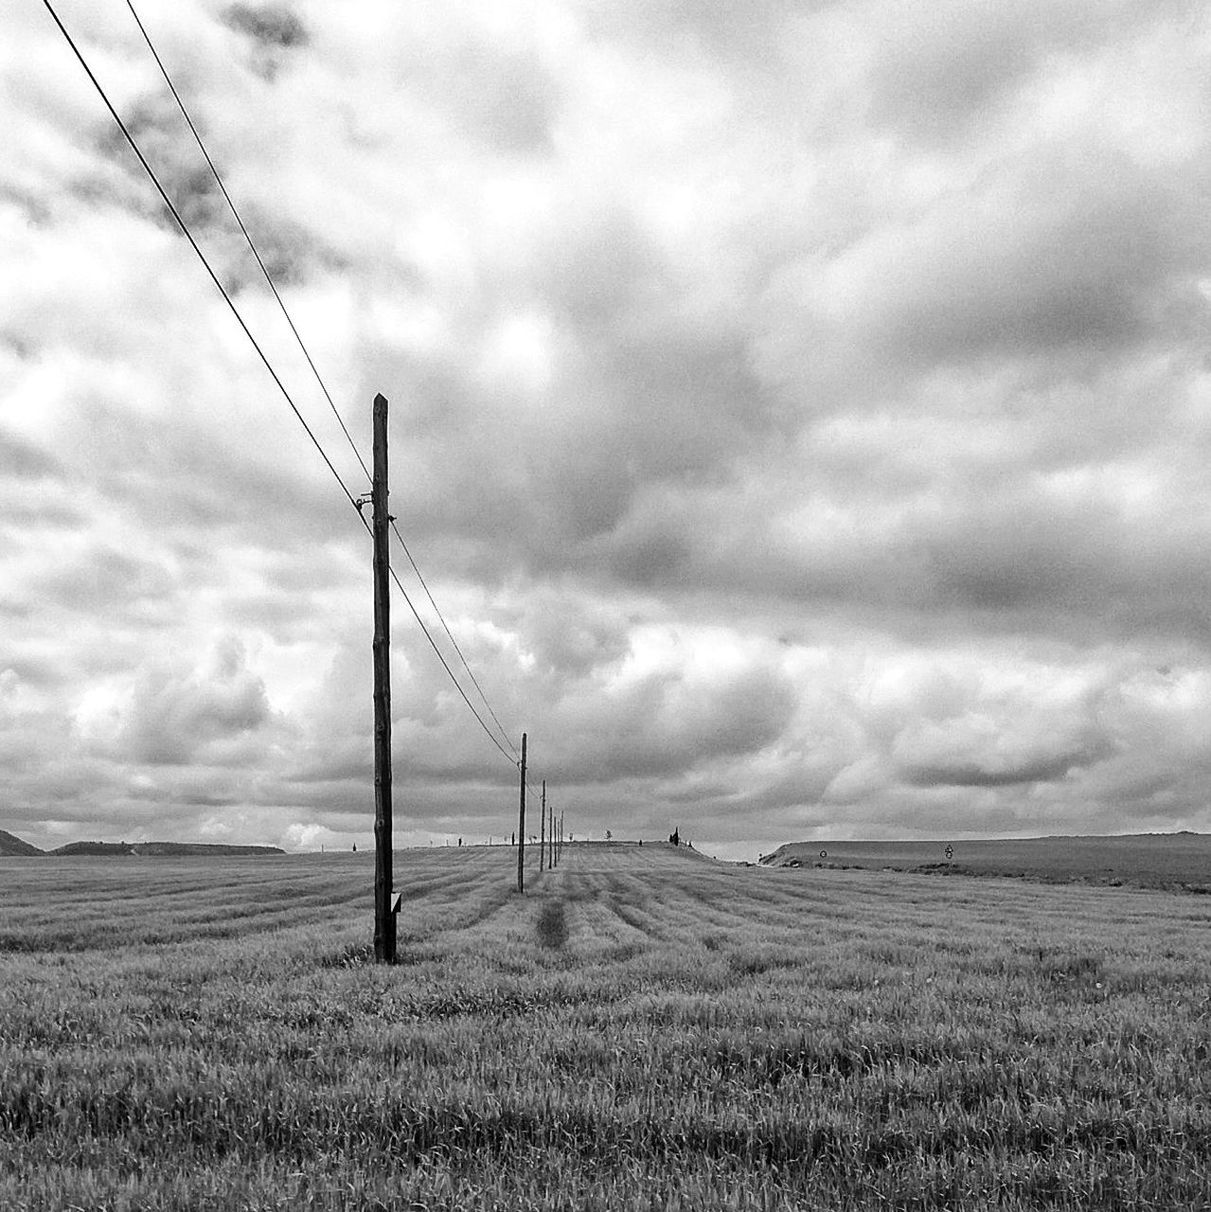 sky, cloudy, cloud - sky, field, landscape, fuel and power generation, electricity pylon, grass, tranquil scene, tranquility, cloud, overcast, weather, nature, connection, rural scene, scenics, wind turbine, electricity, alternative energy